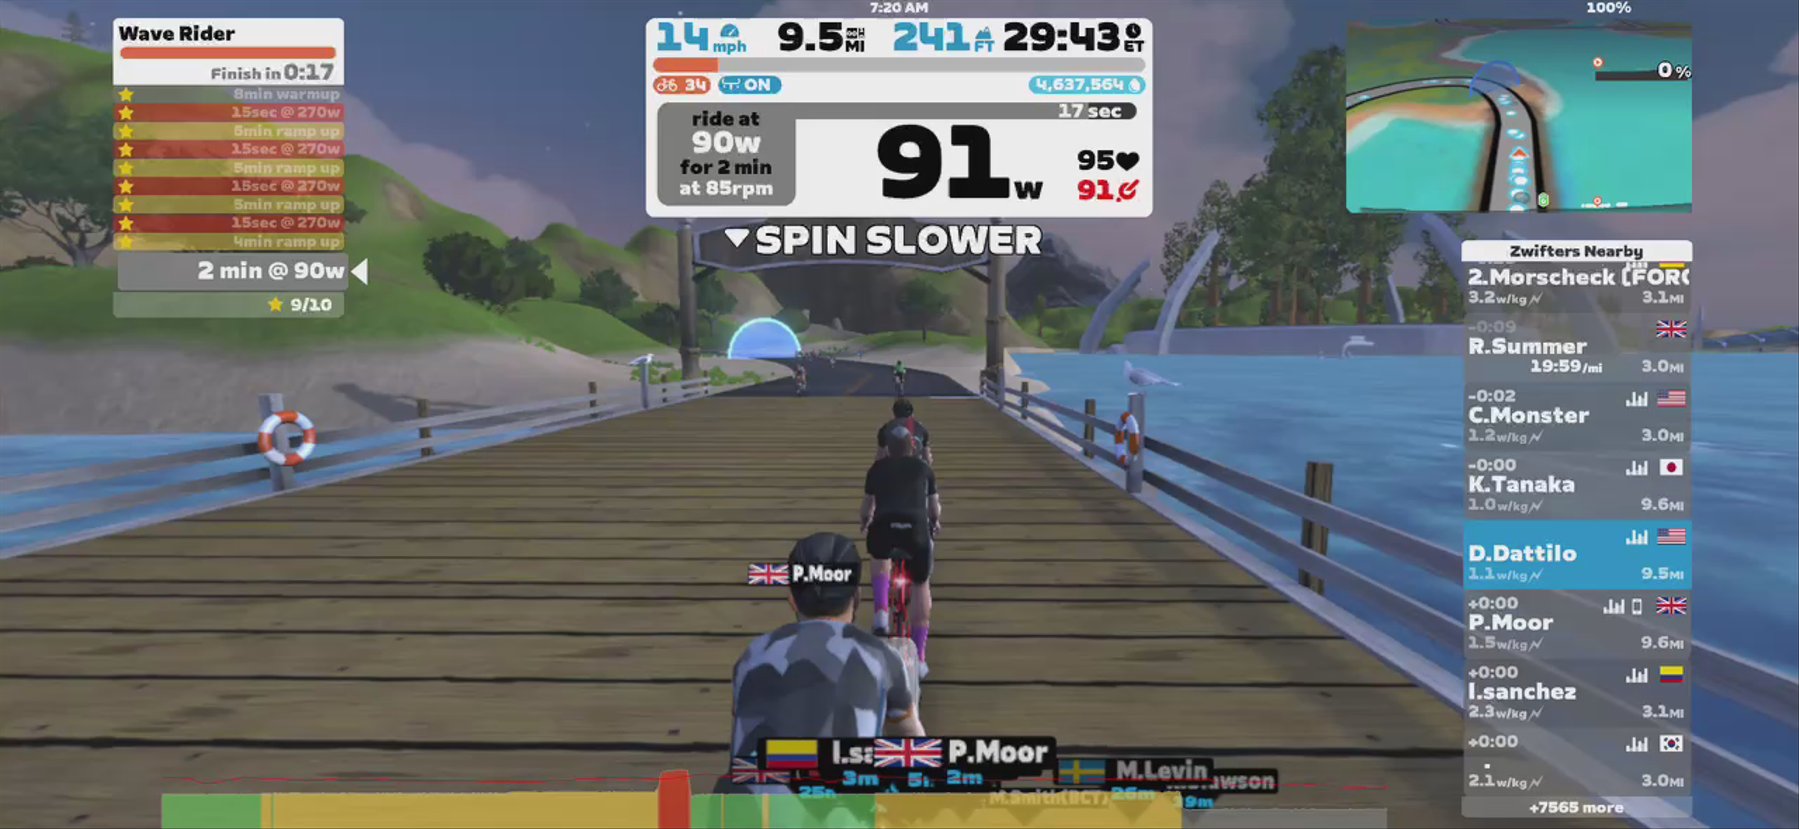 Zwift - Workout of the Week | Wave Rider in Watopia